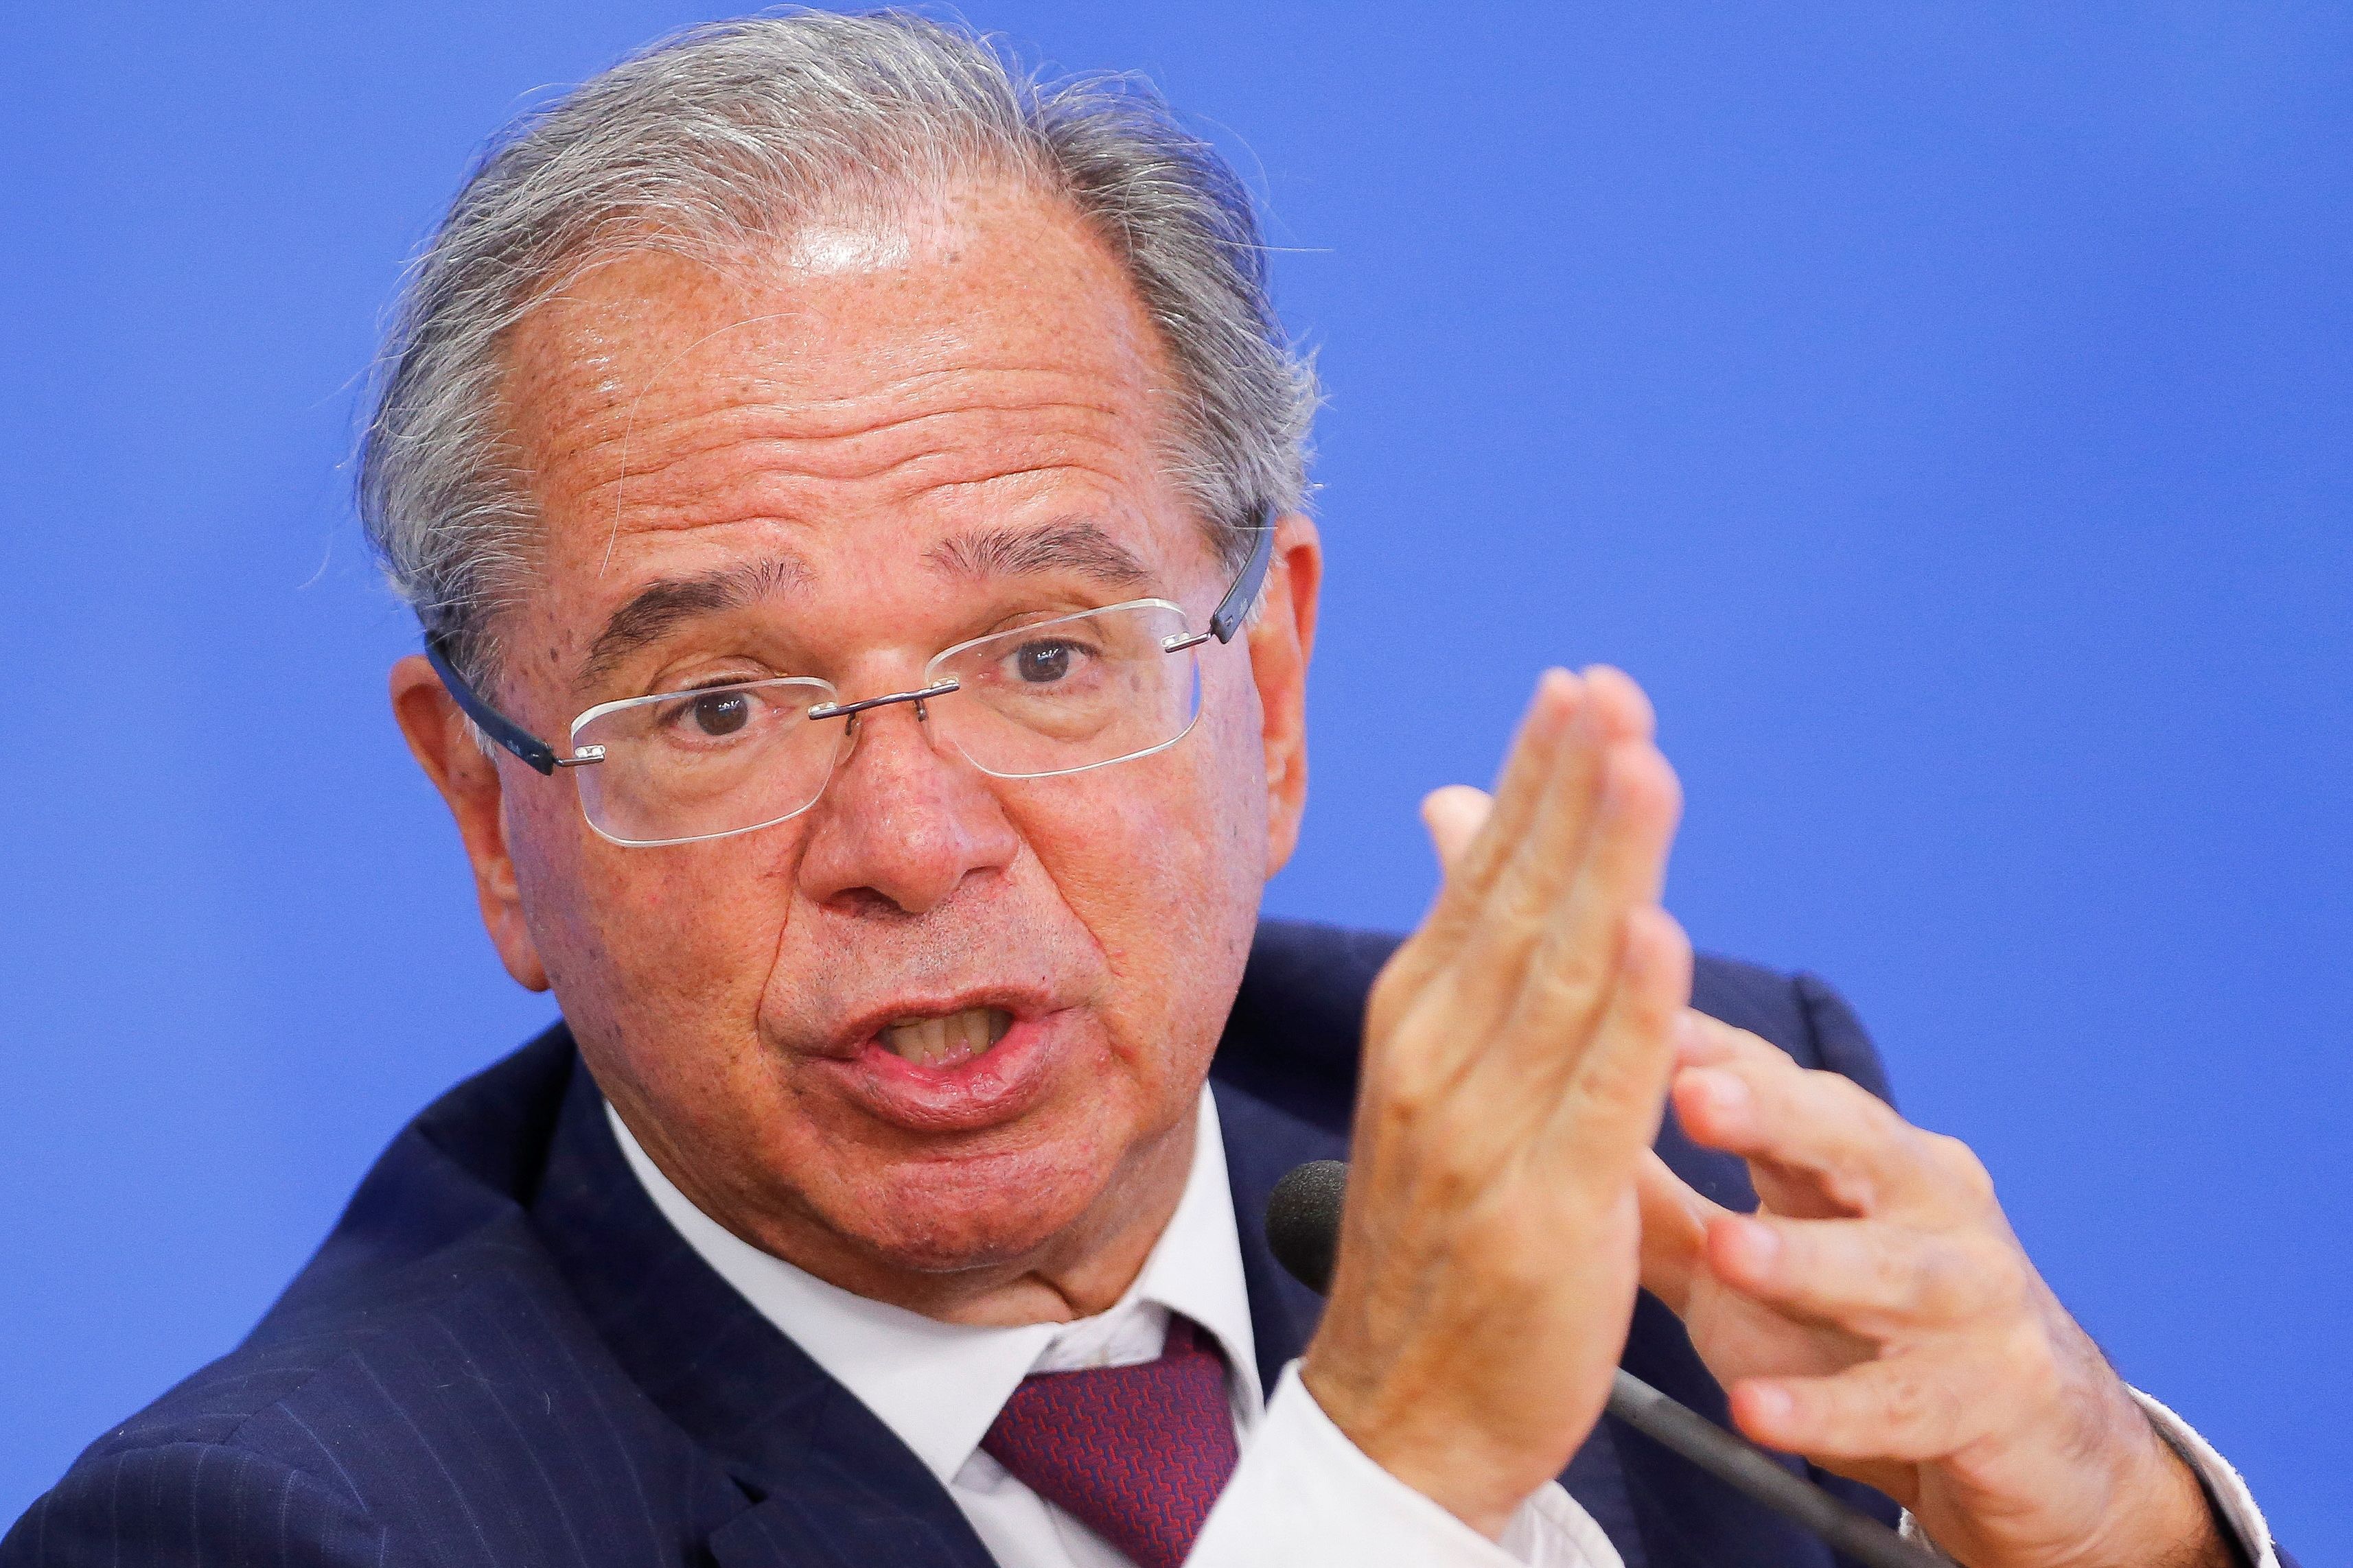 Brazil's Economy Minister Paulo Guedes addresses the media at the Planalto Palace in Brasilia